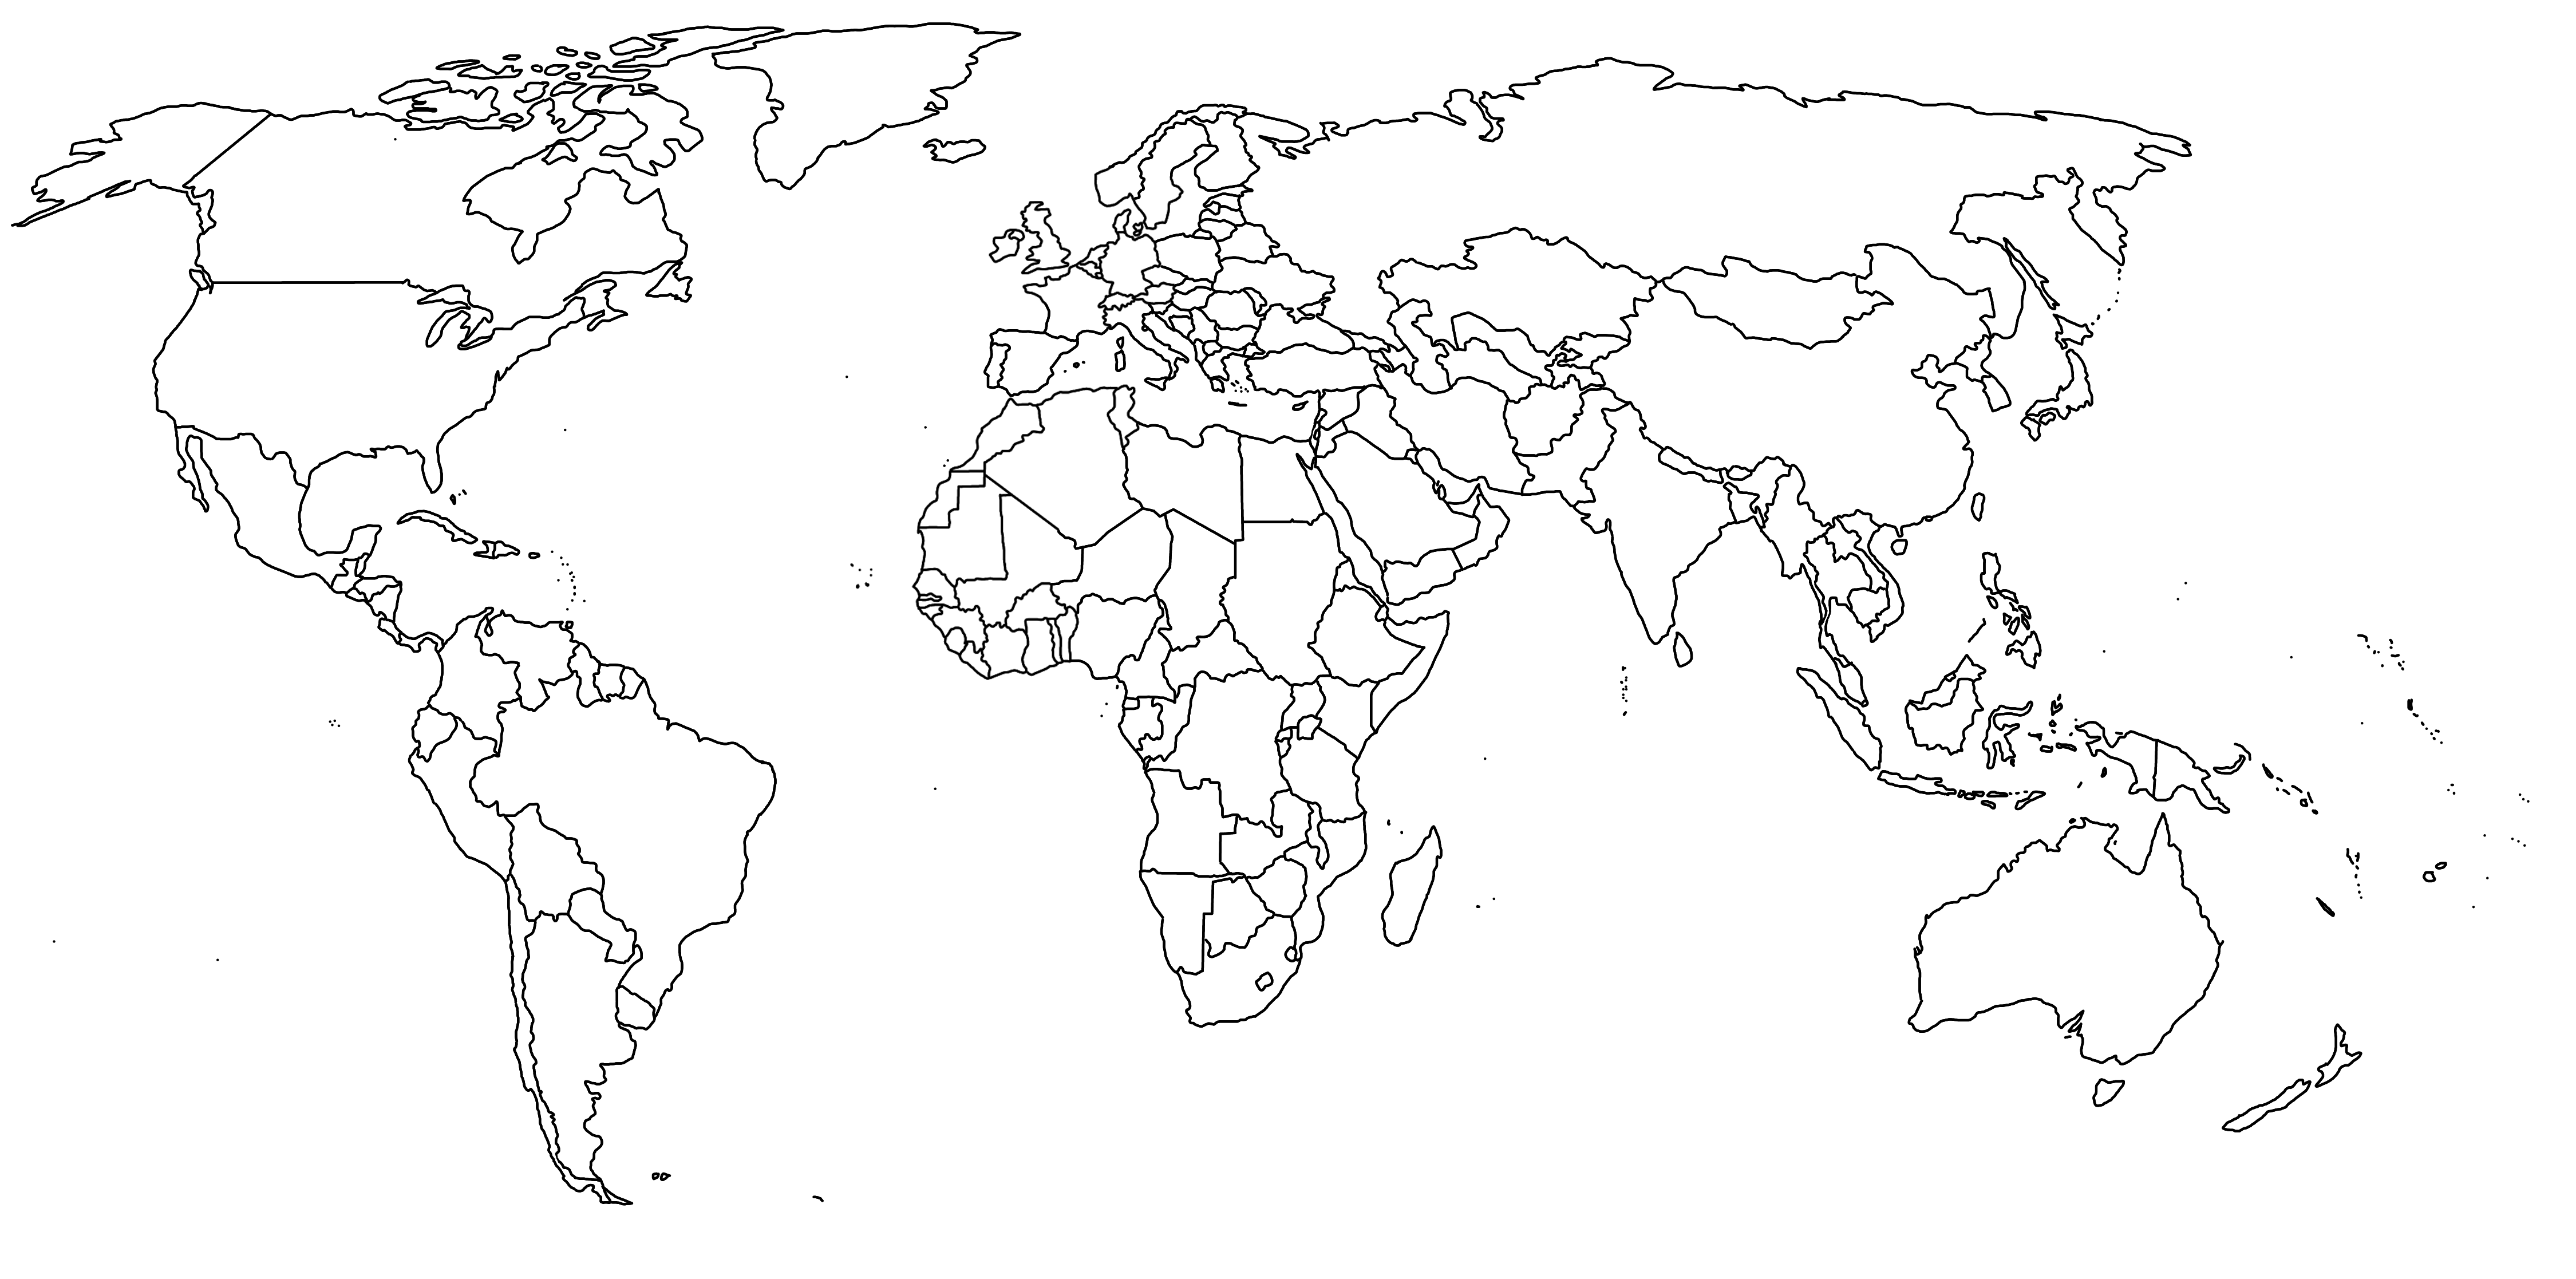 Printable Blank World Map Coloring Page.